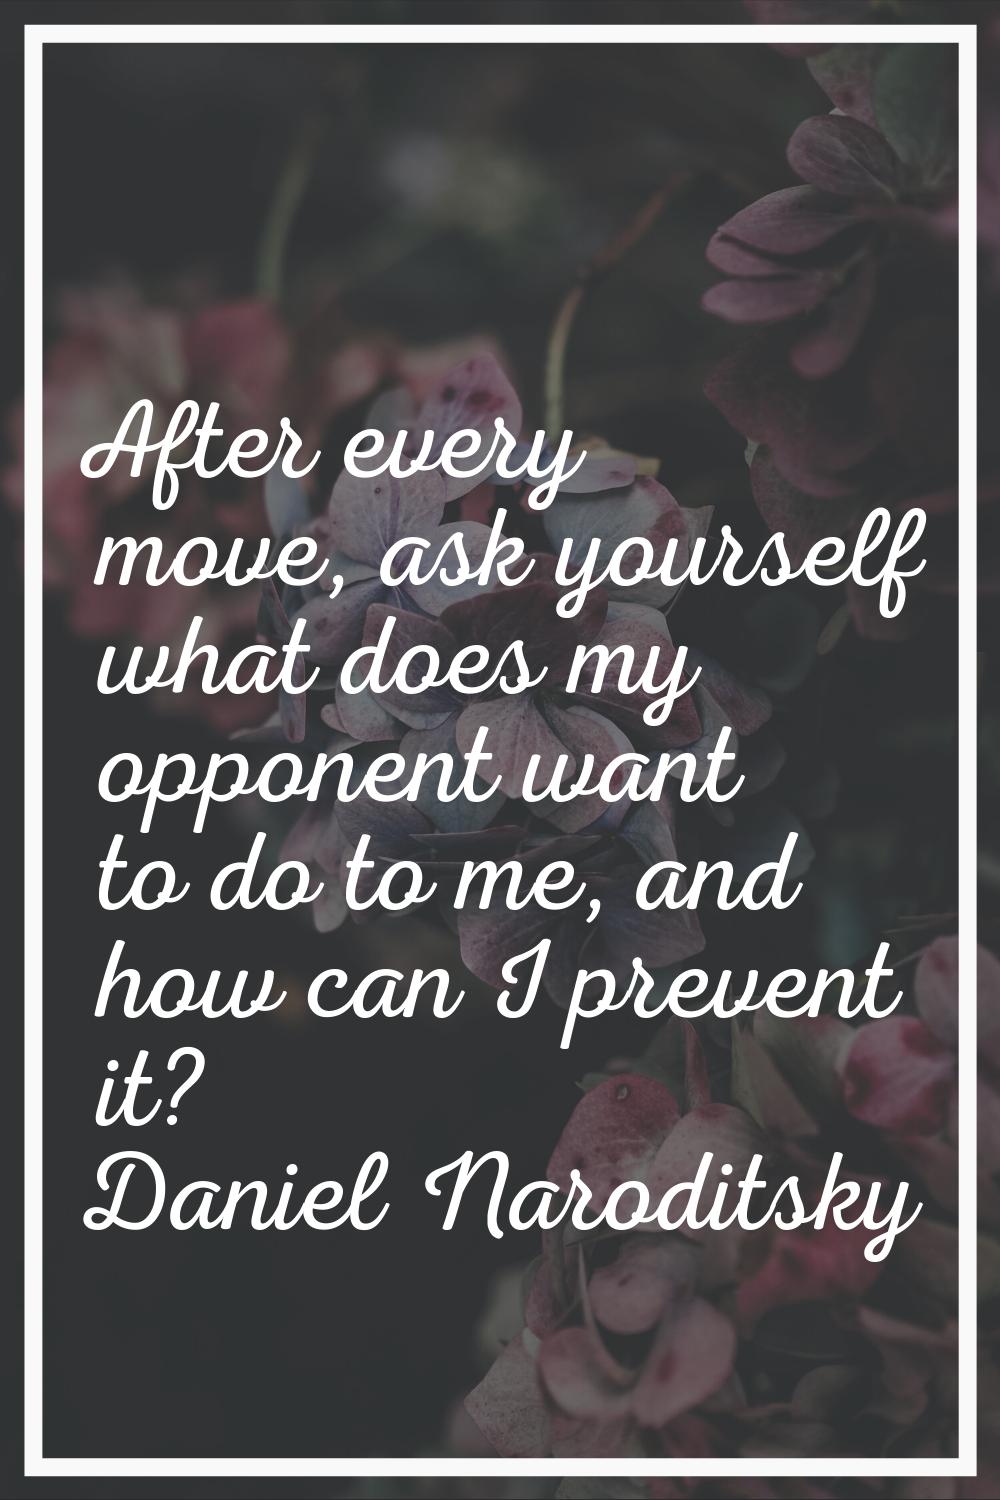 After every move, ask yourself what does my opponent want to do to me, and how can I prevent it?